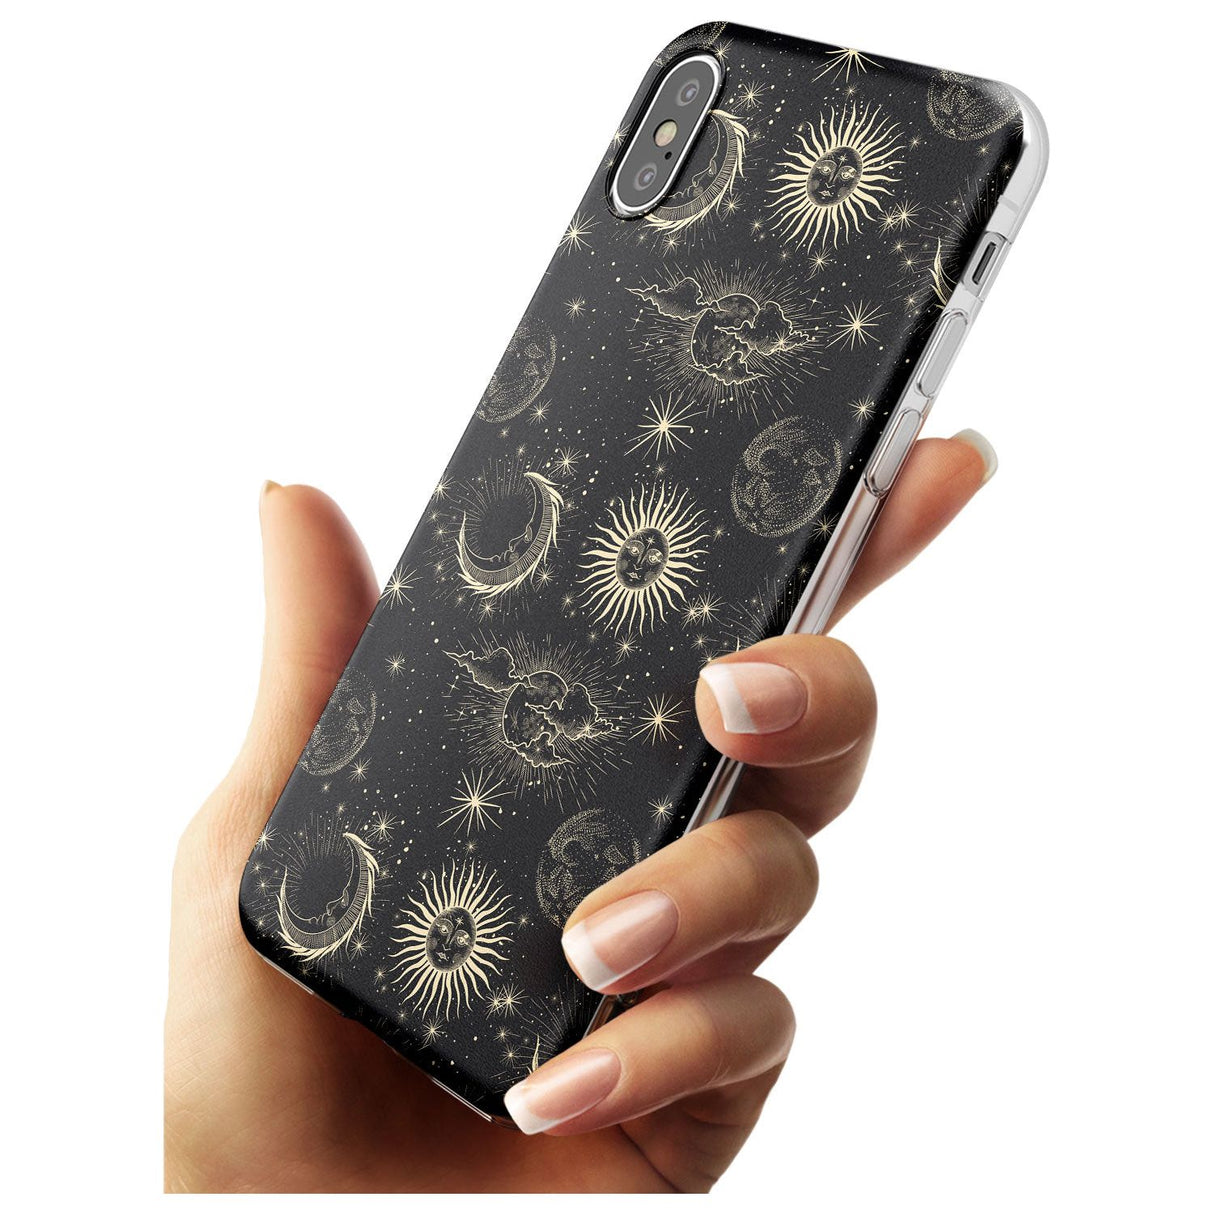 Large Suns, Moons & Clouds Black Impact Phone Case for iPhone X XS Max XR